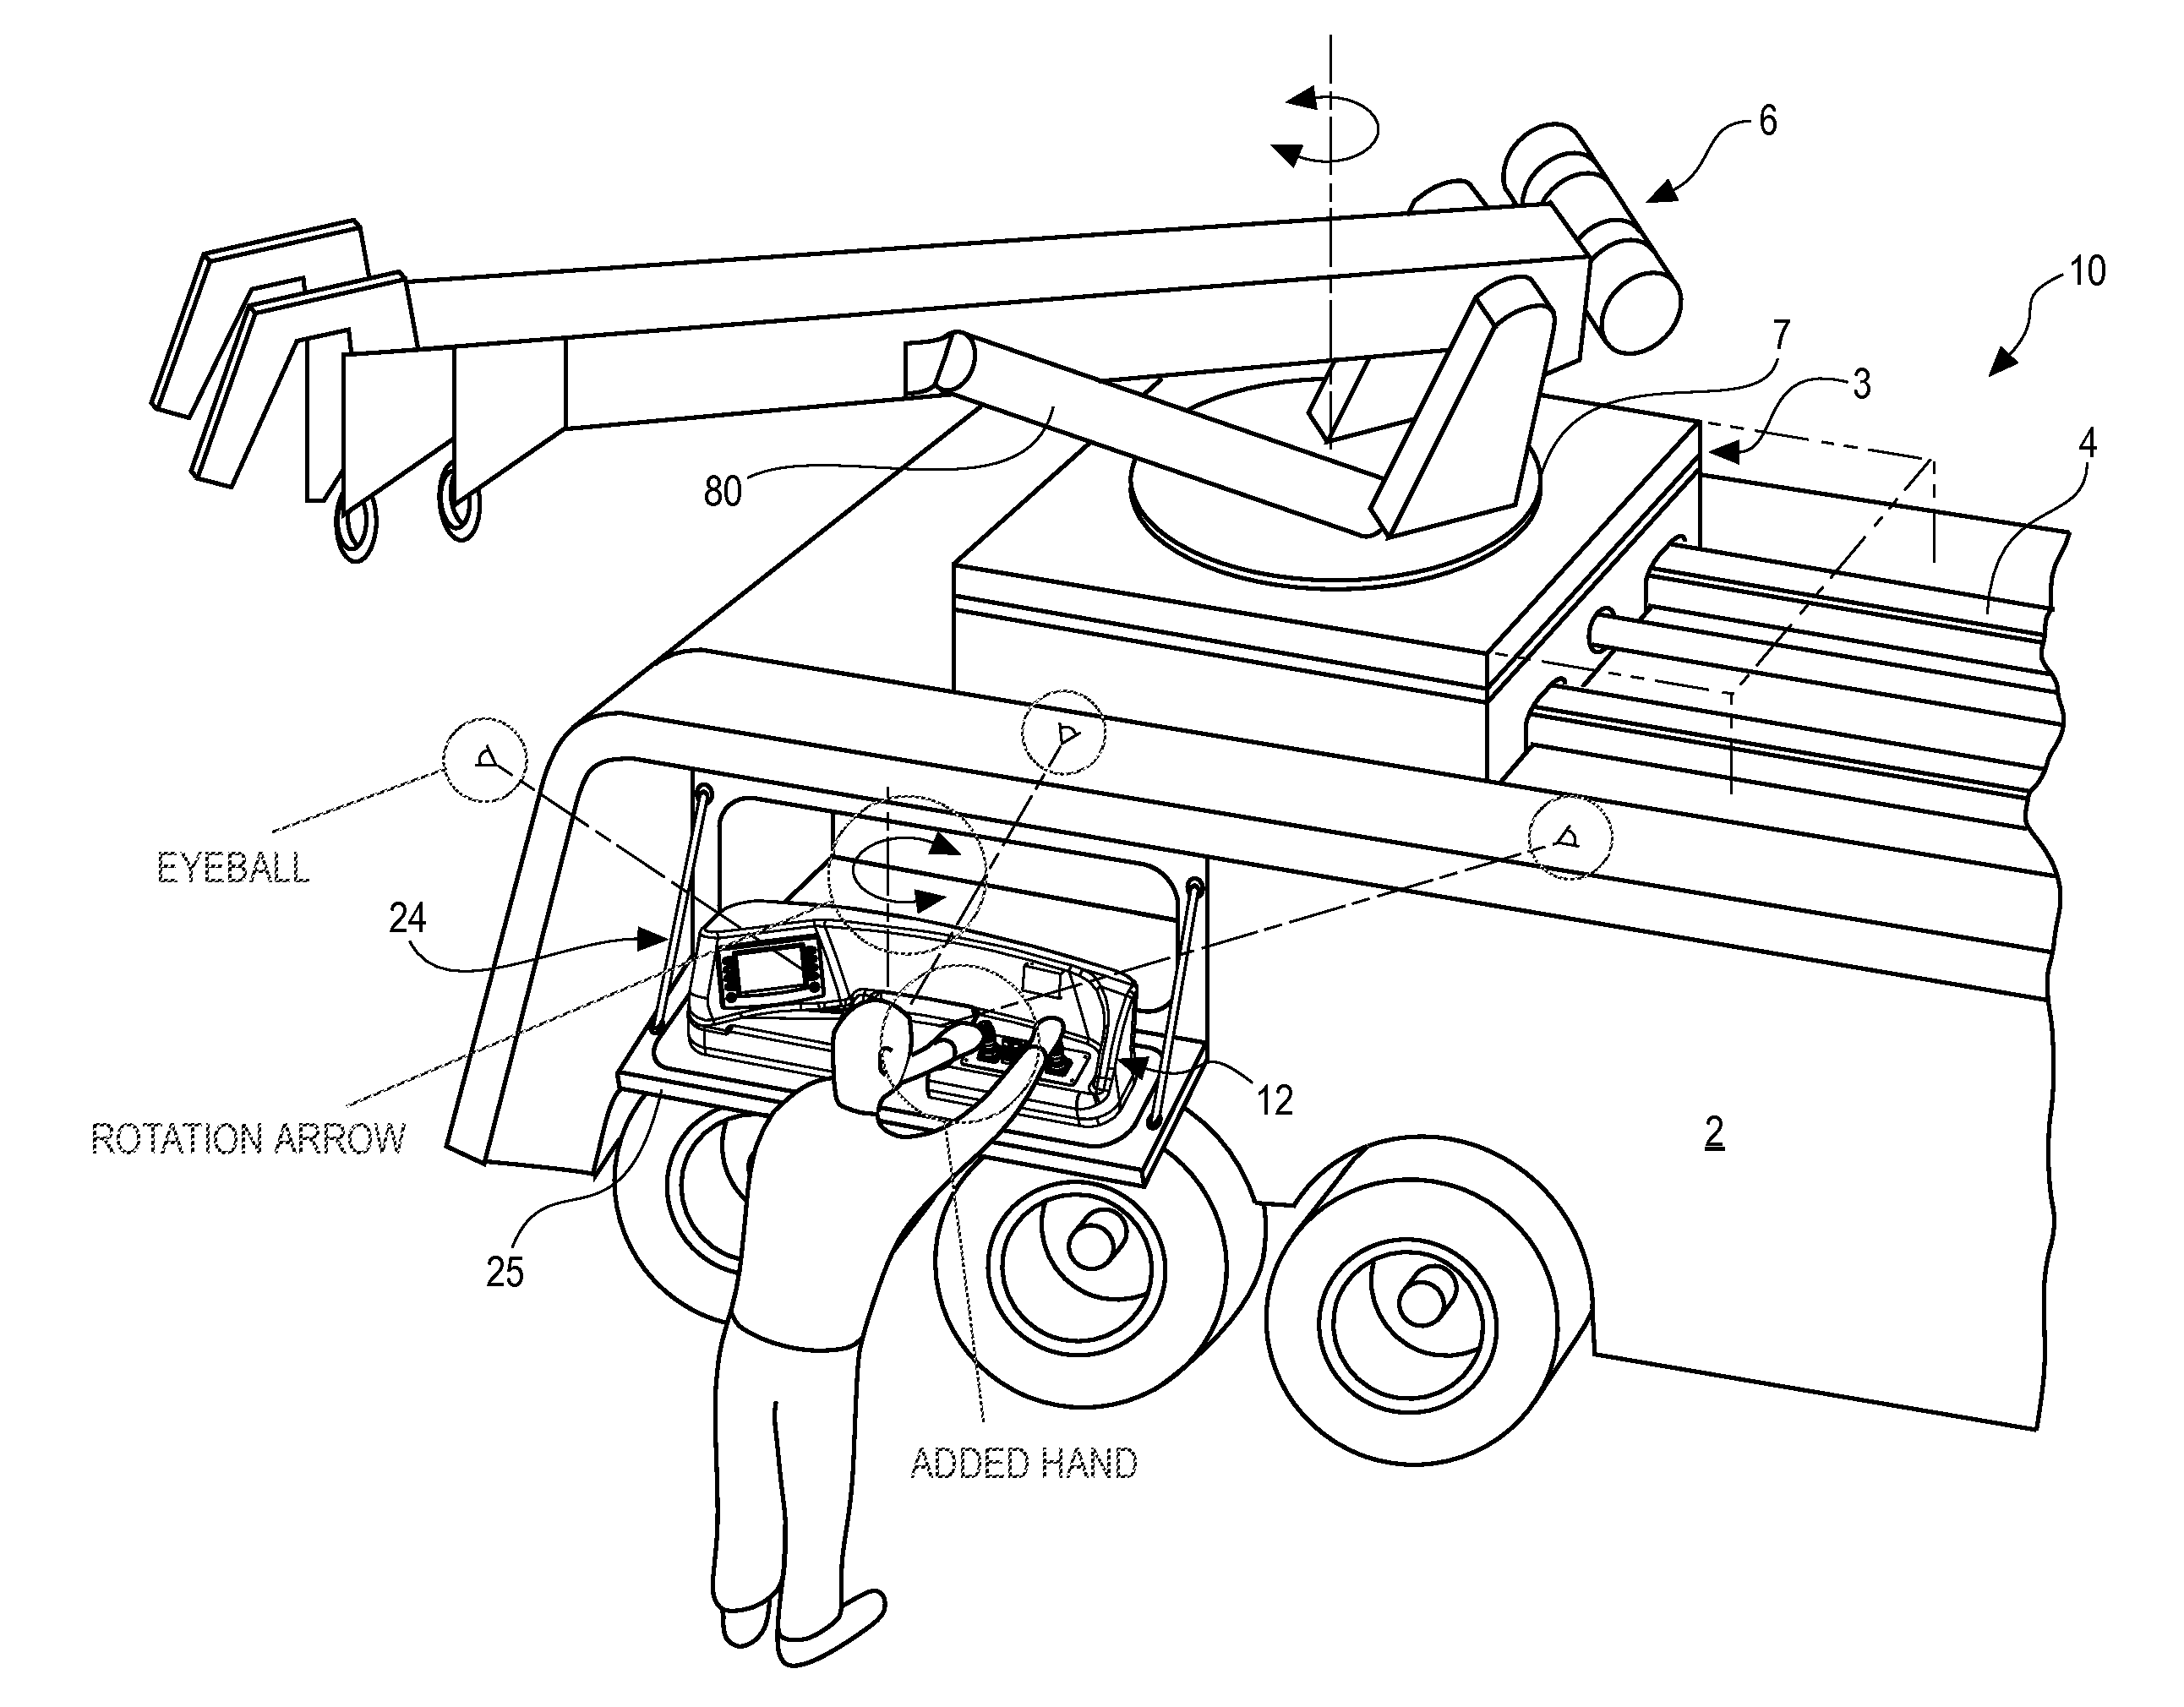 Vehicle wrecker with improved controls